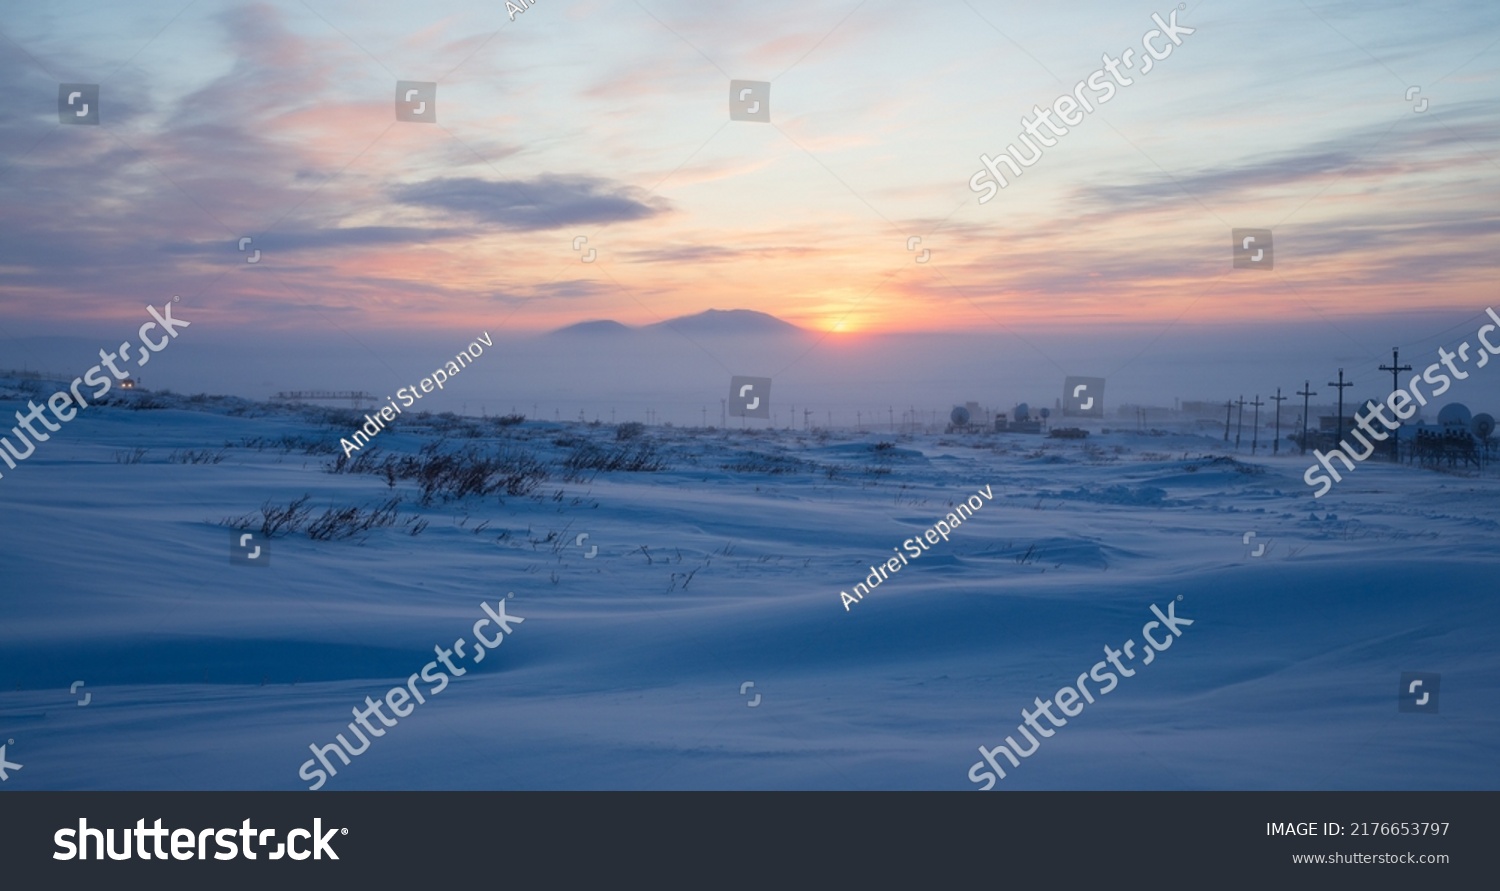 Winter arctic landscape. Sunset in the tundra. Early winter twilight. Cold frosty winter weather. Electric poles and satellite dishes in the snowy tundra. Chukotka, Siberia, Far East of Russia, Arctic #2176653797